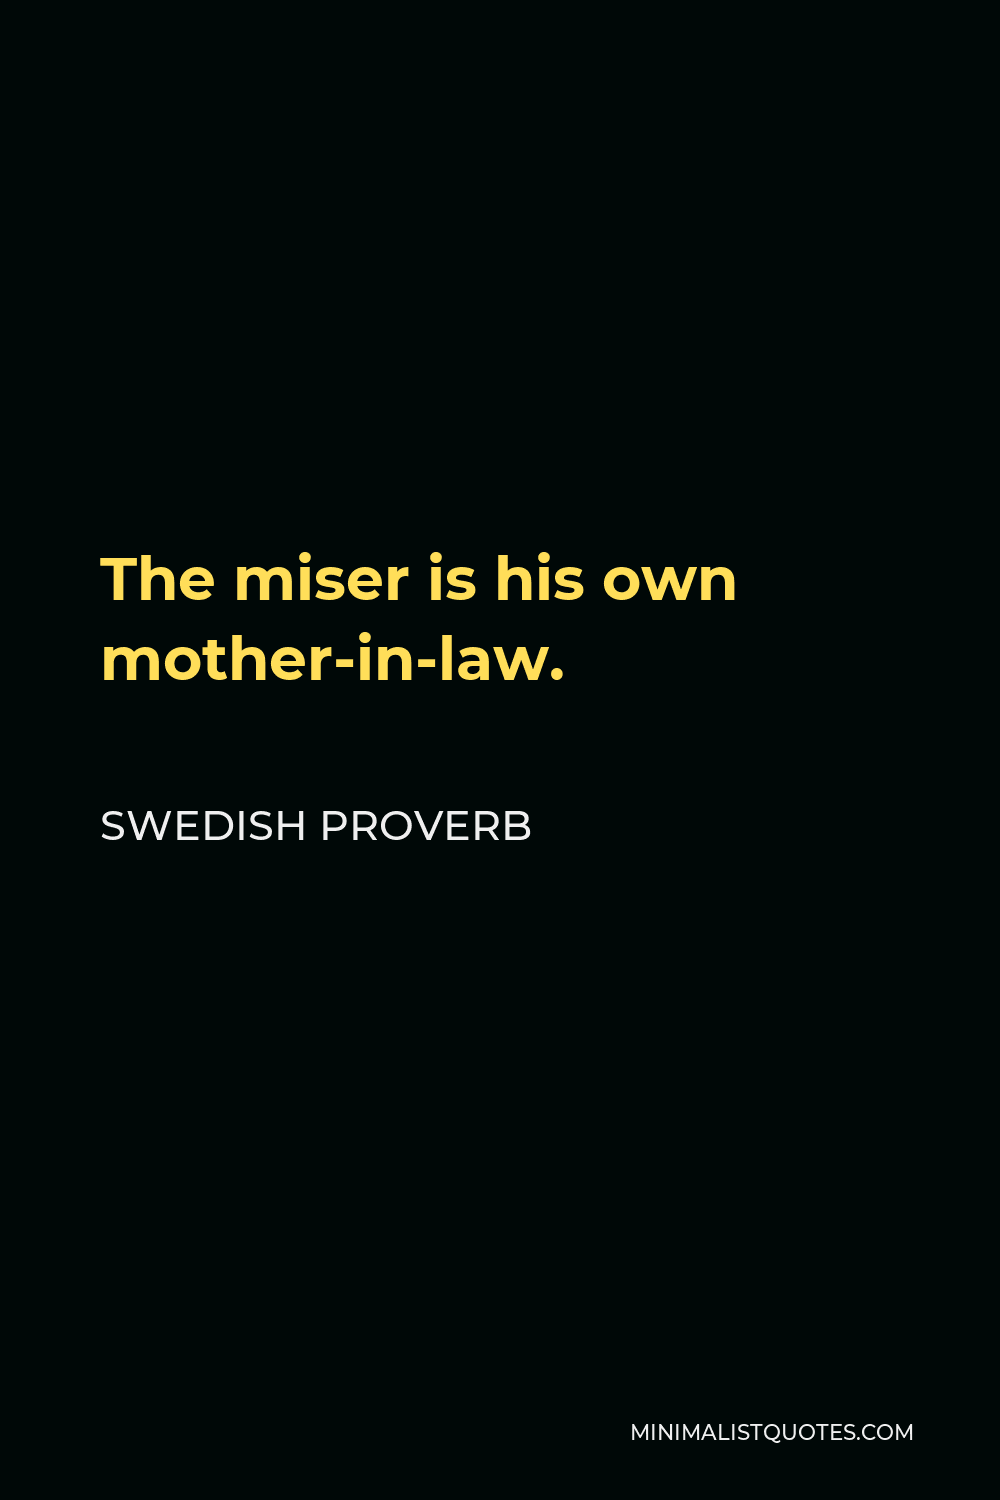 Swedish Proverb Quote - The miser is his own mother-in-law.